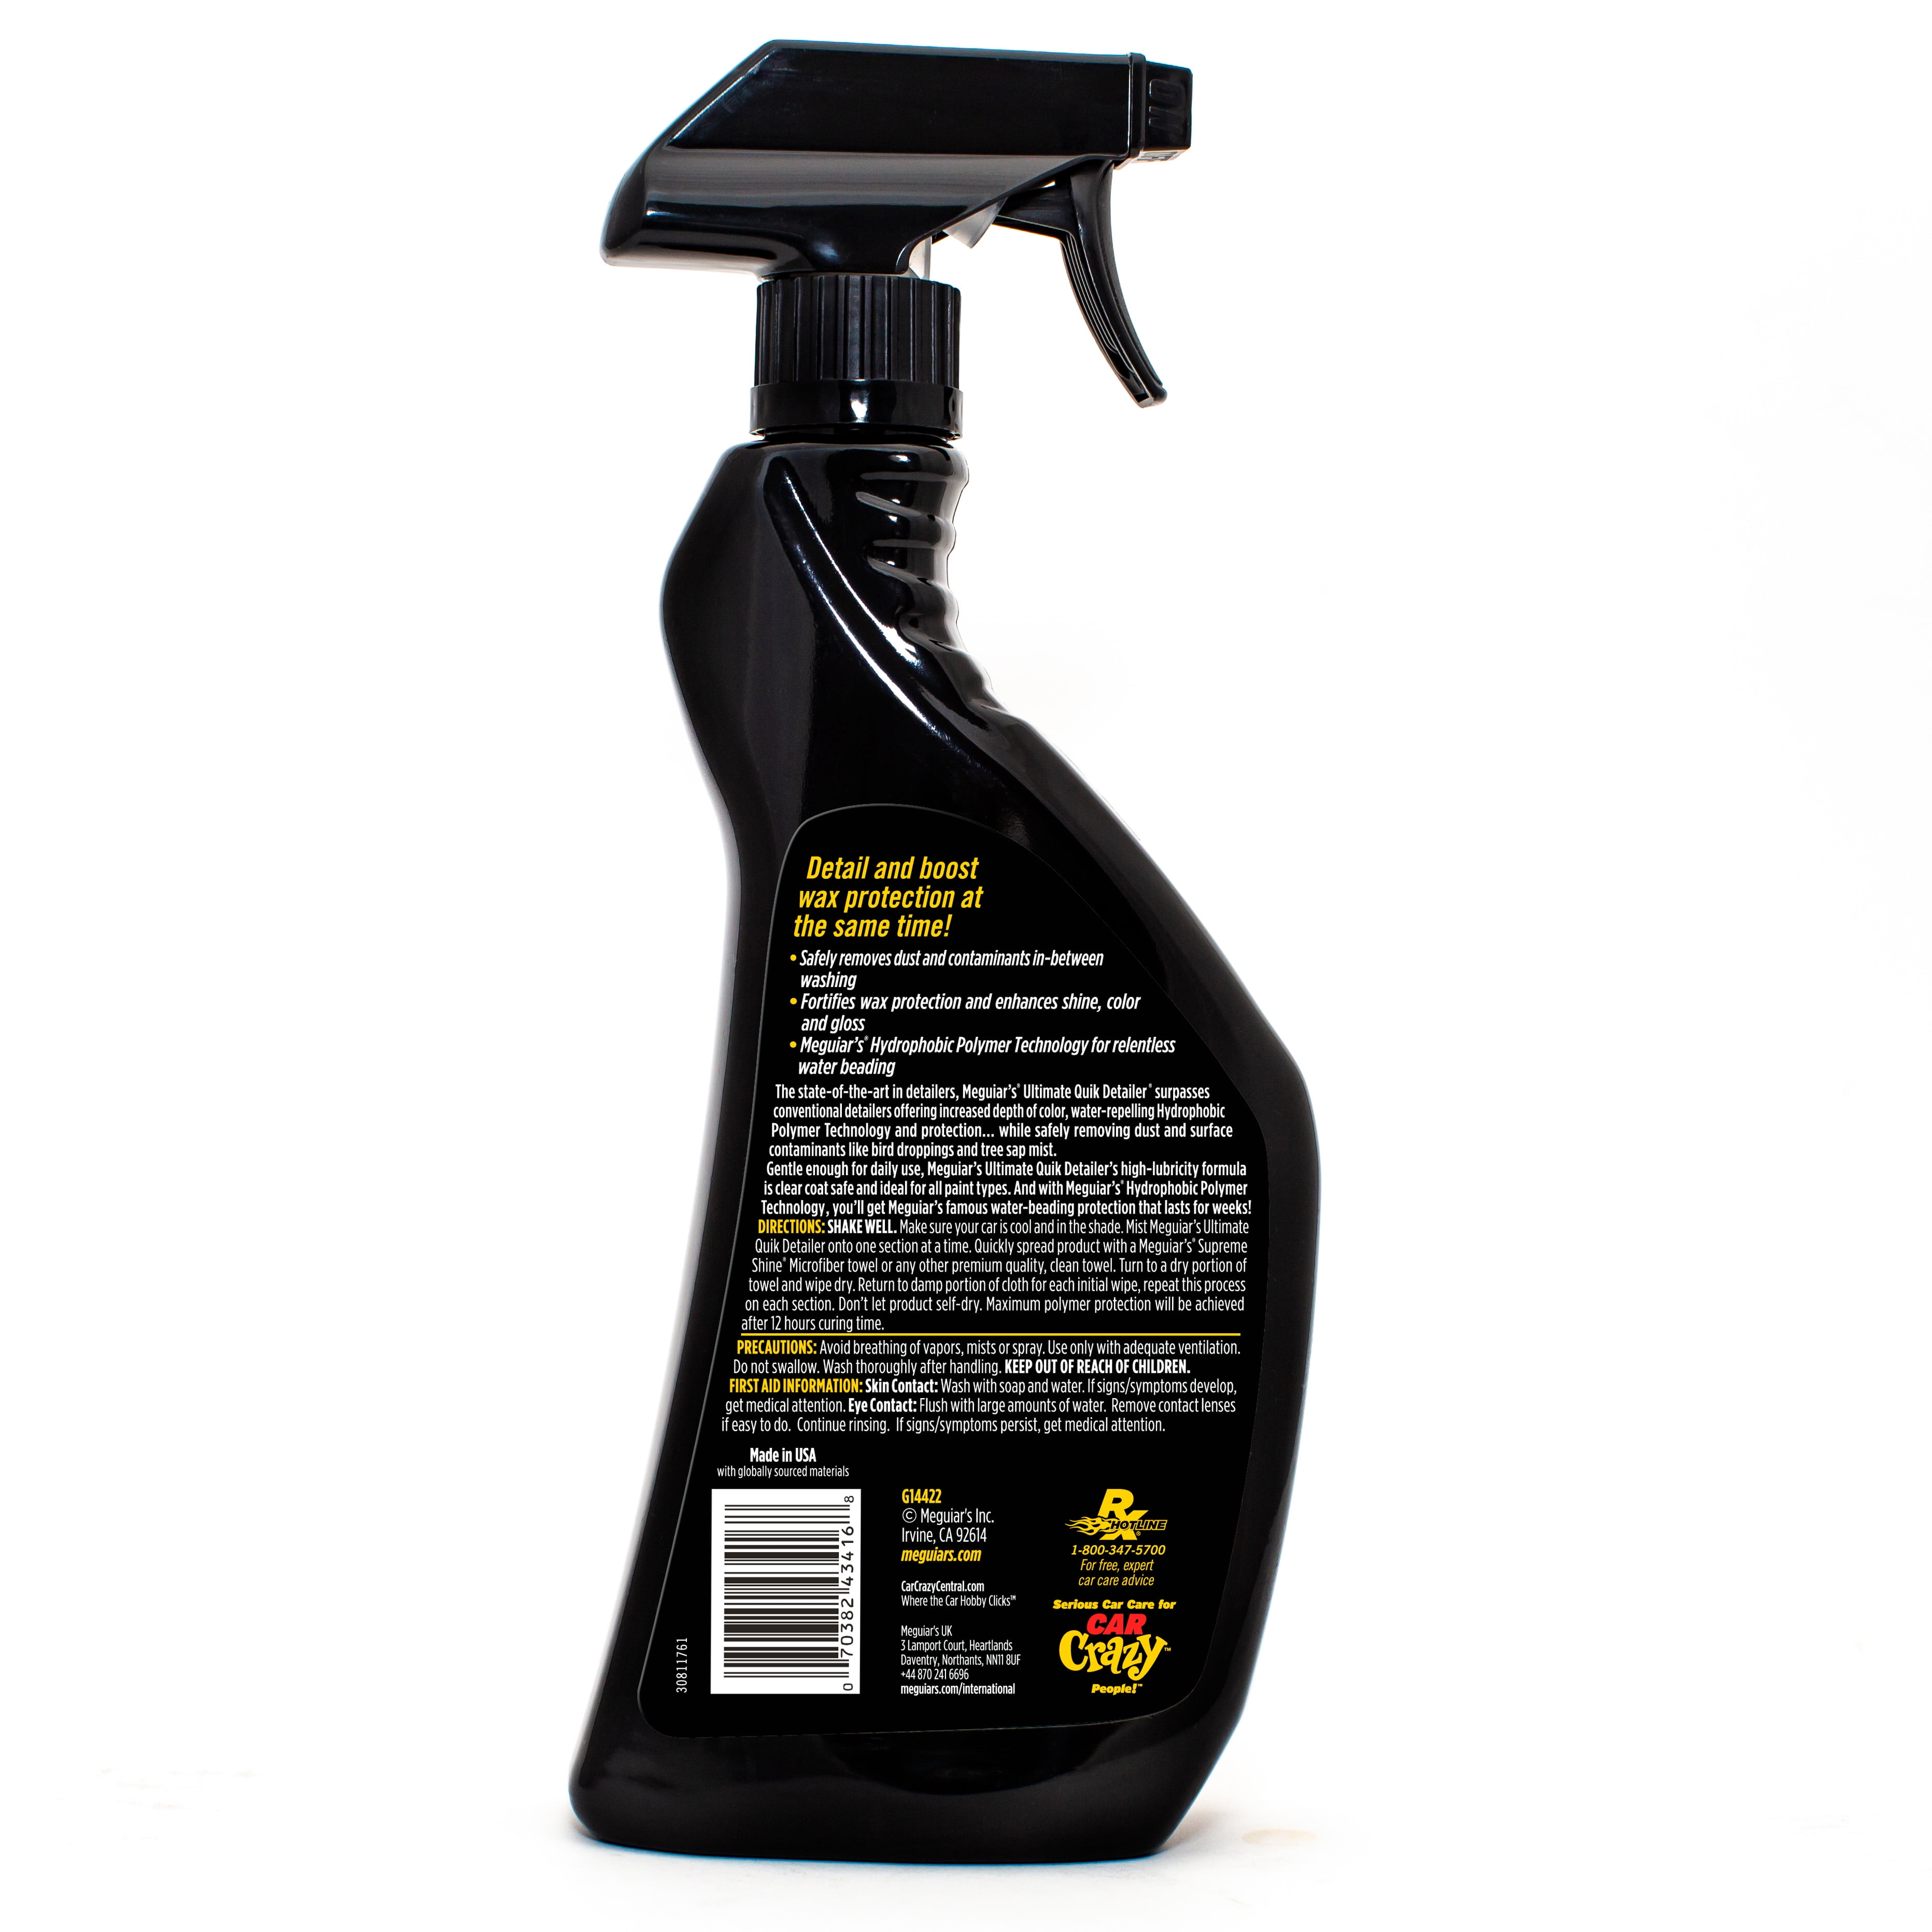 Auto Detailing Supplies - This Powerful Concentrate Will Make Your